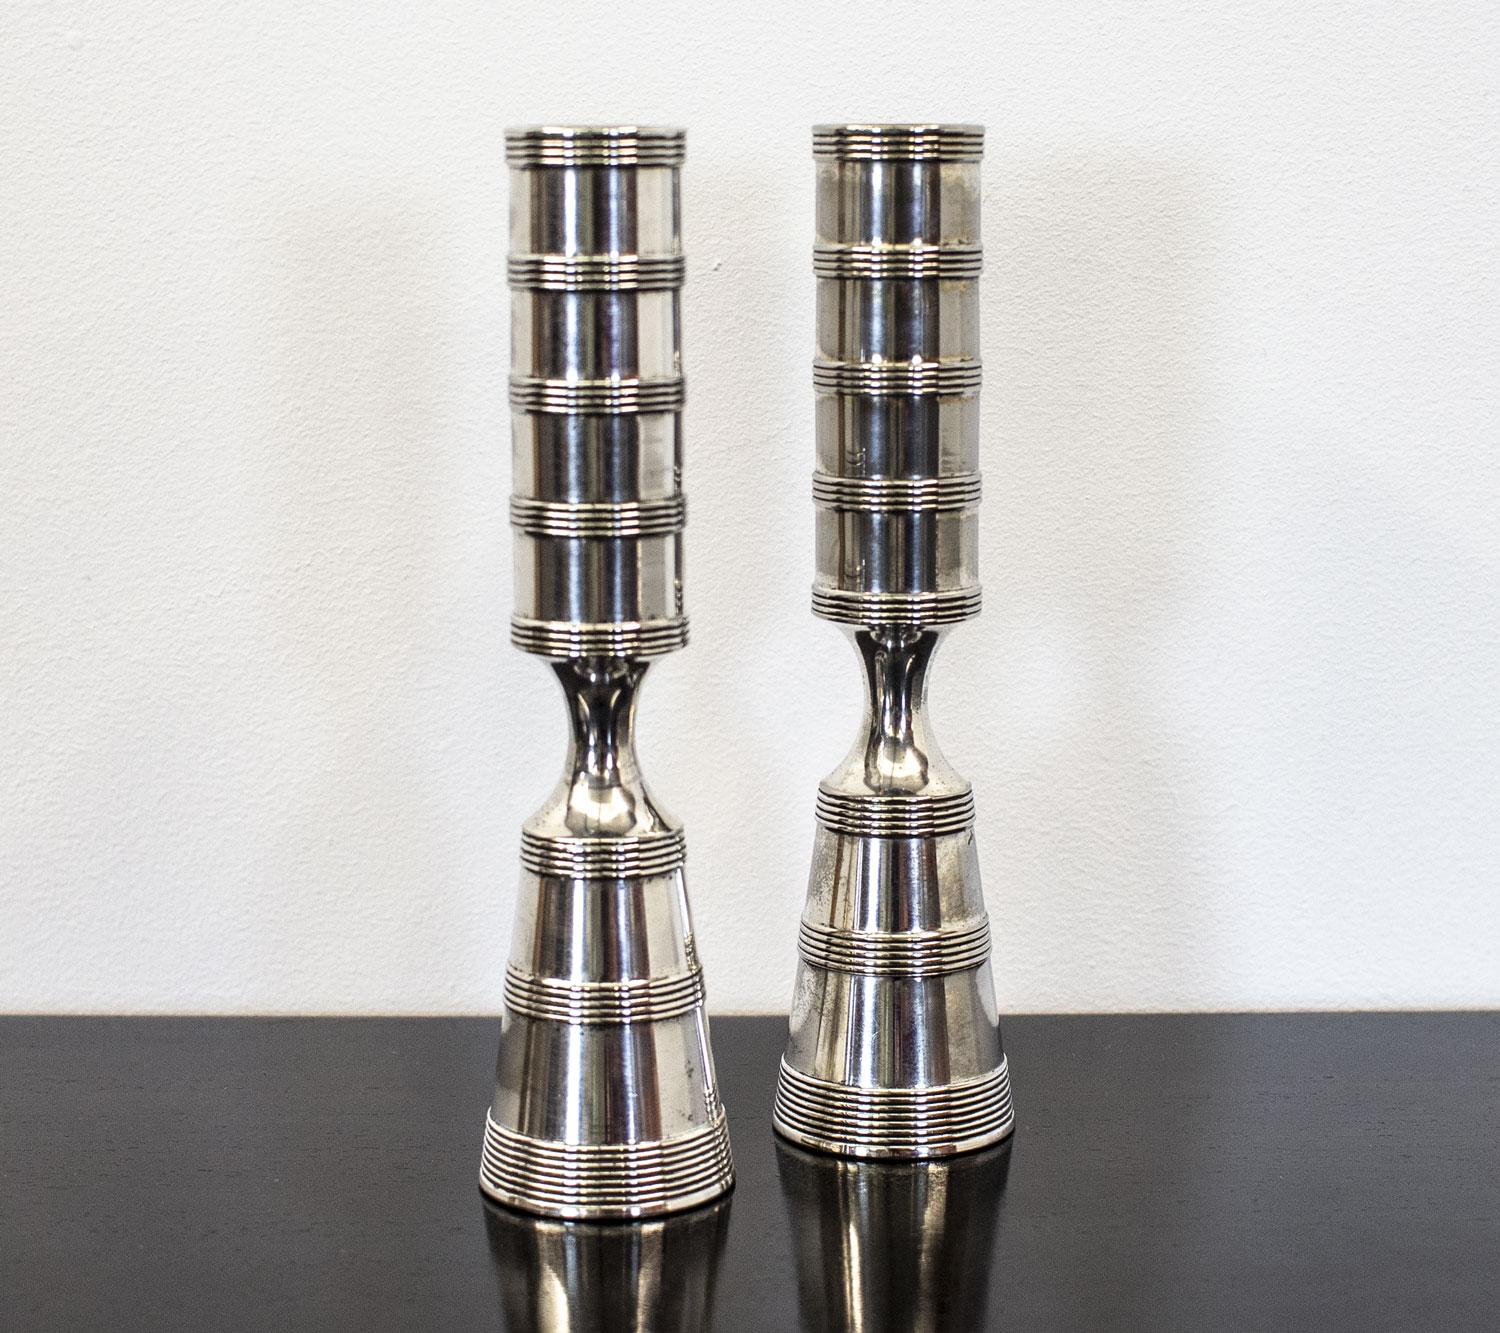 Scandinavian Modern Mid Century Pair of Danish Silver Candleholders by Jens Quistgaard For Sale